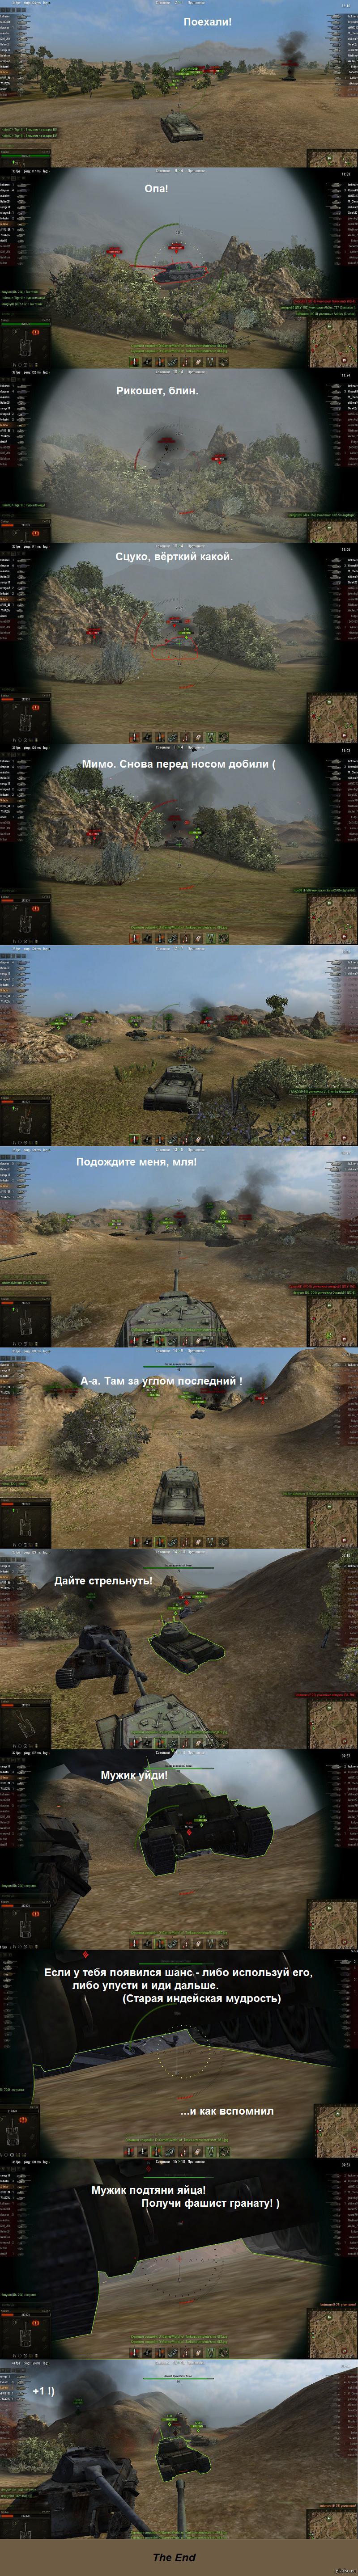 WOT and the wisdom of Indian shamans)) - NSFW, World of tanks, Indians, Games, Comics